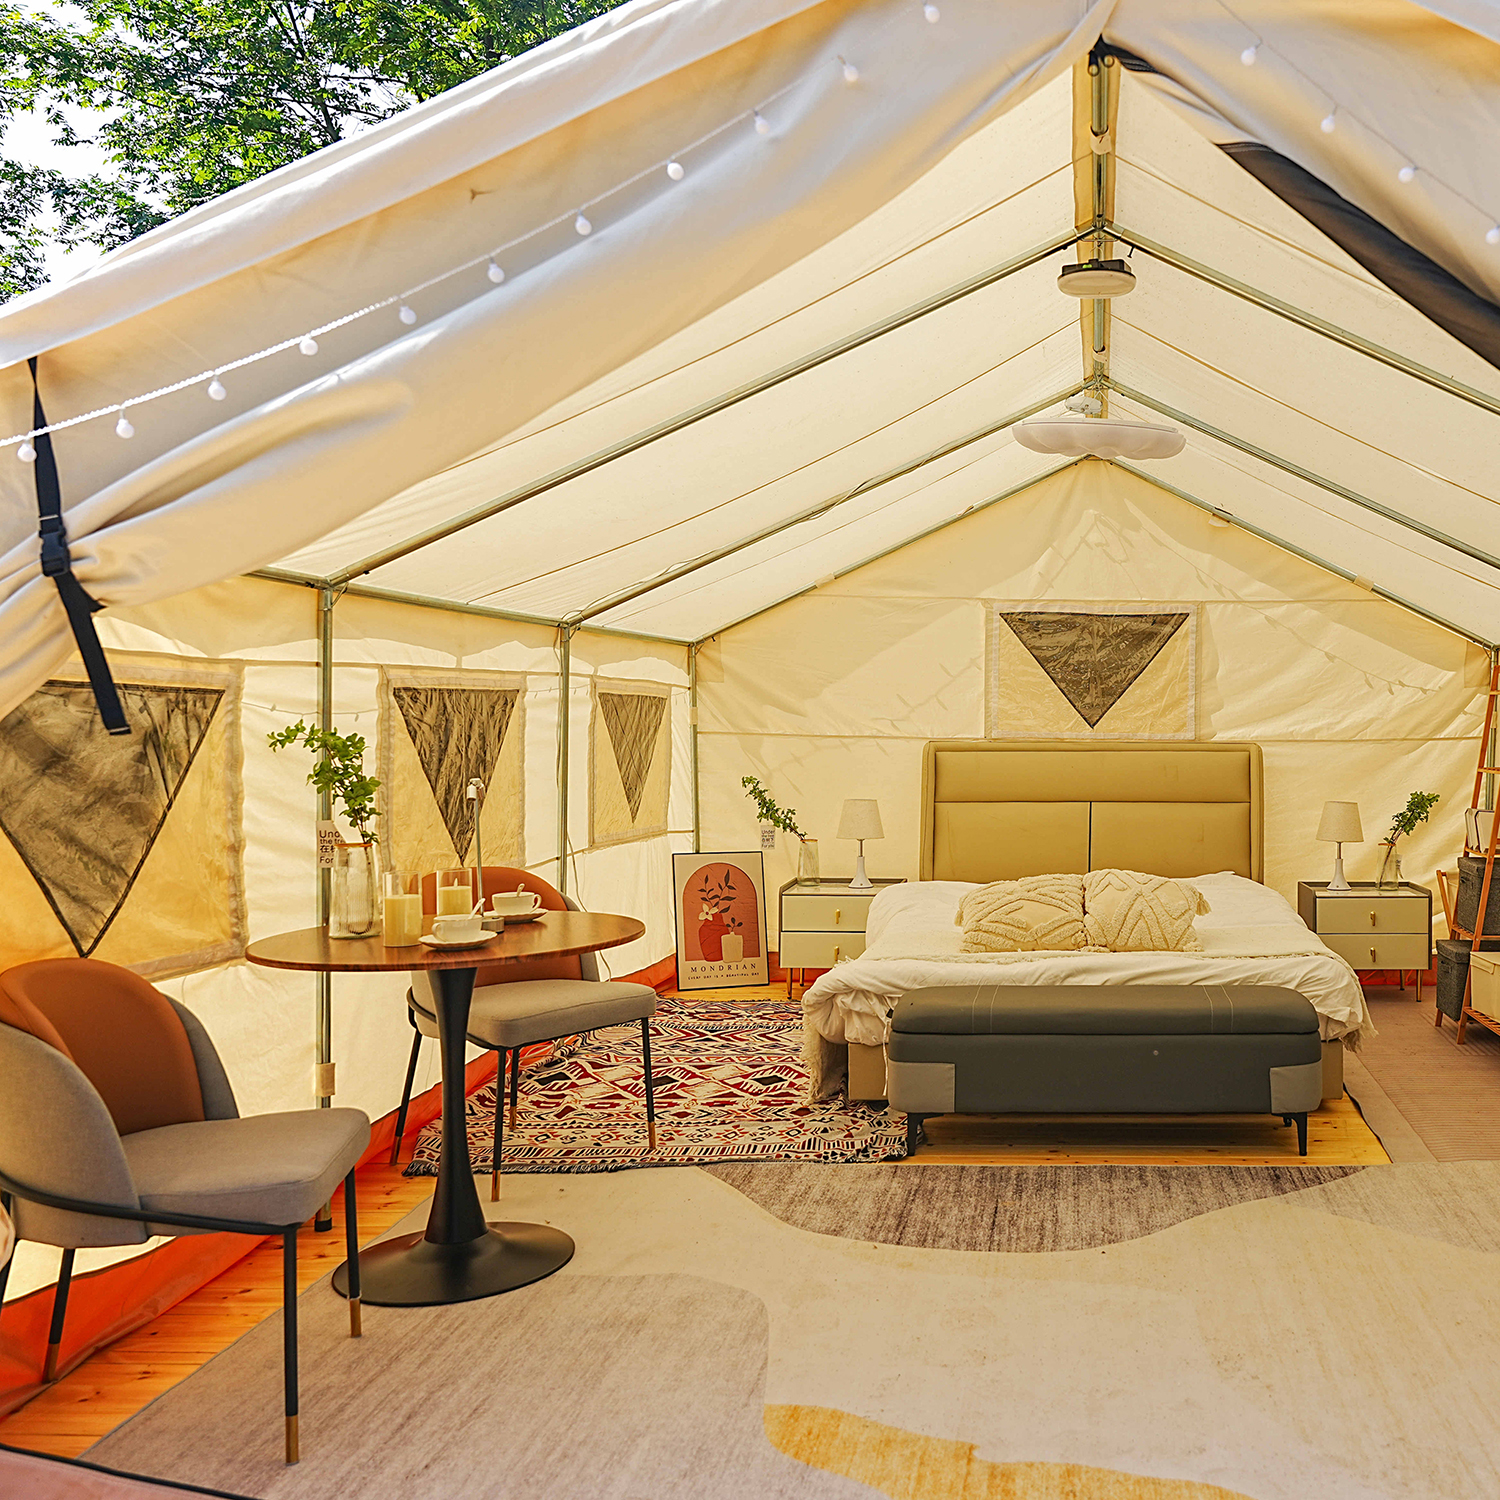 Elevate Your Campsite with Luxury Wall Tents